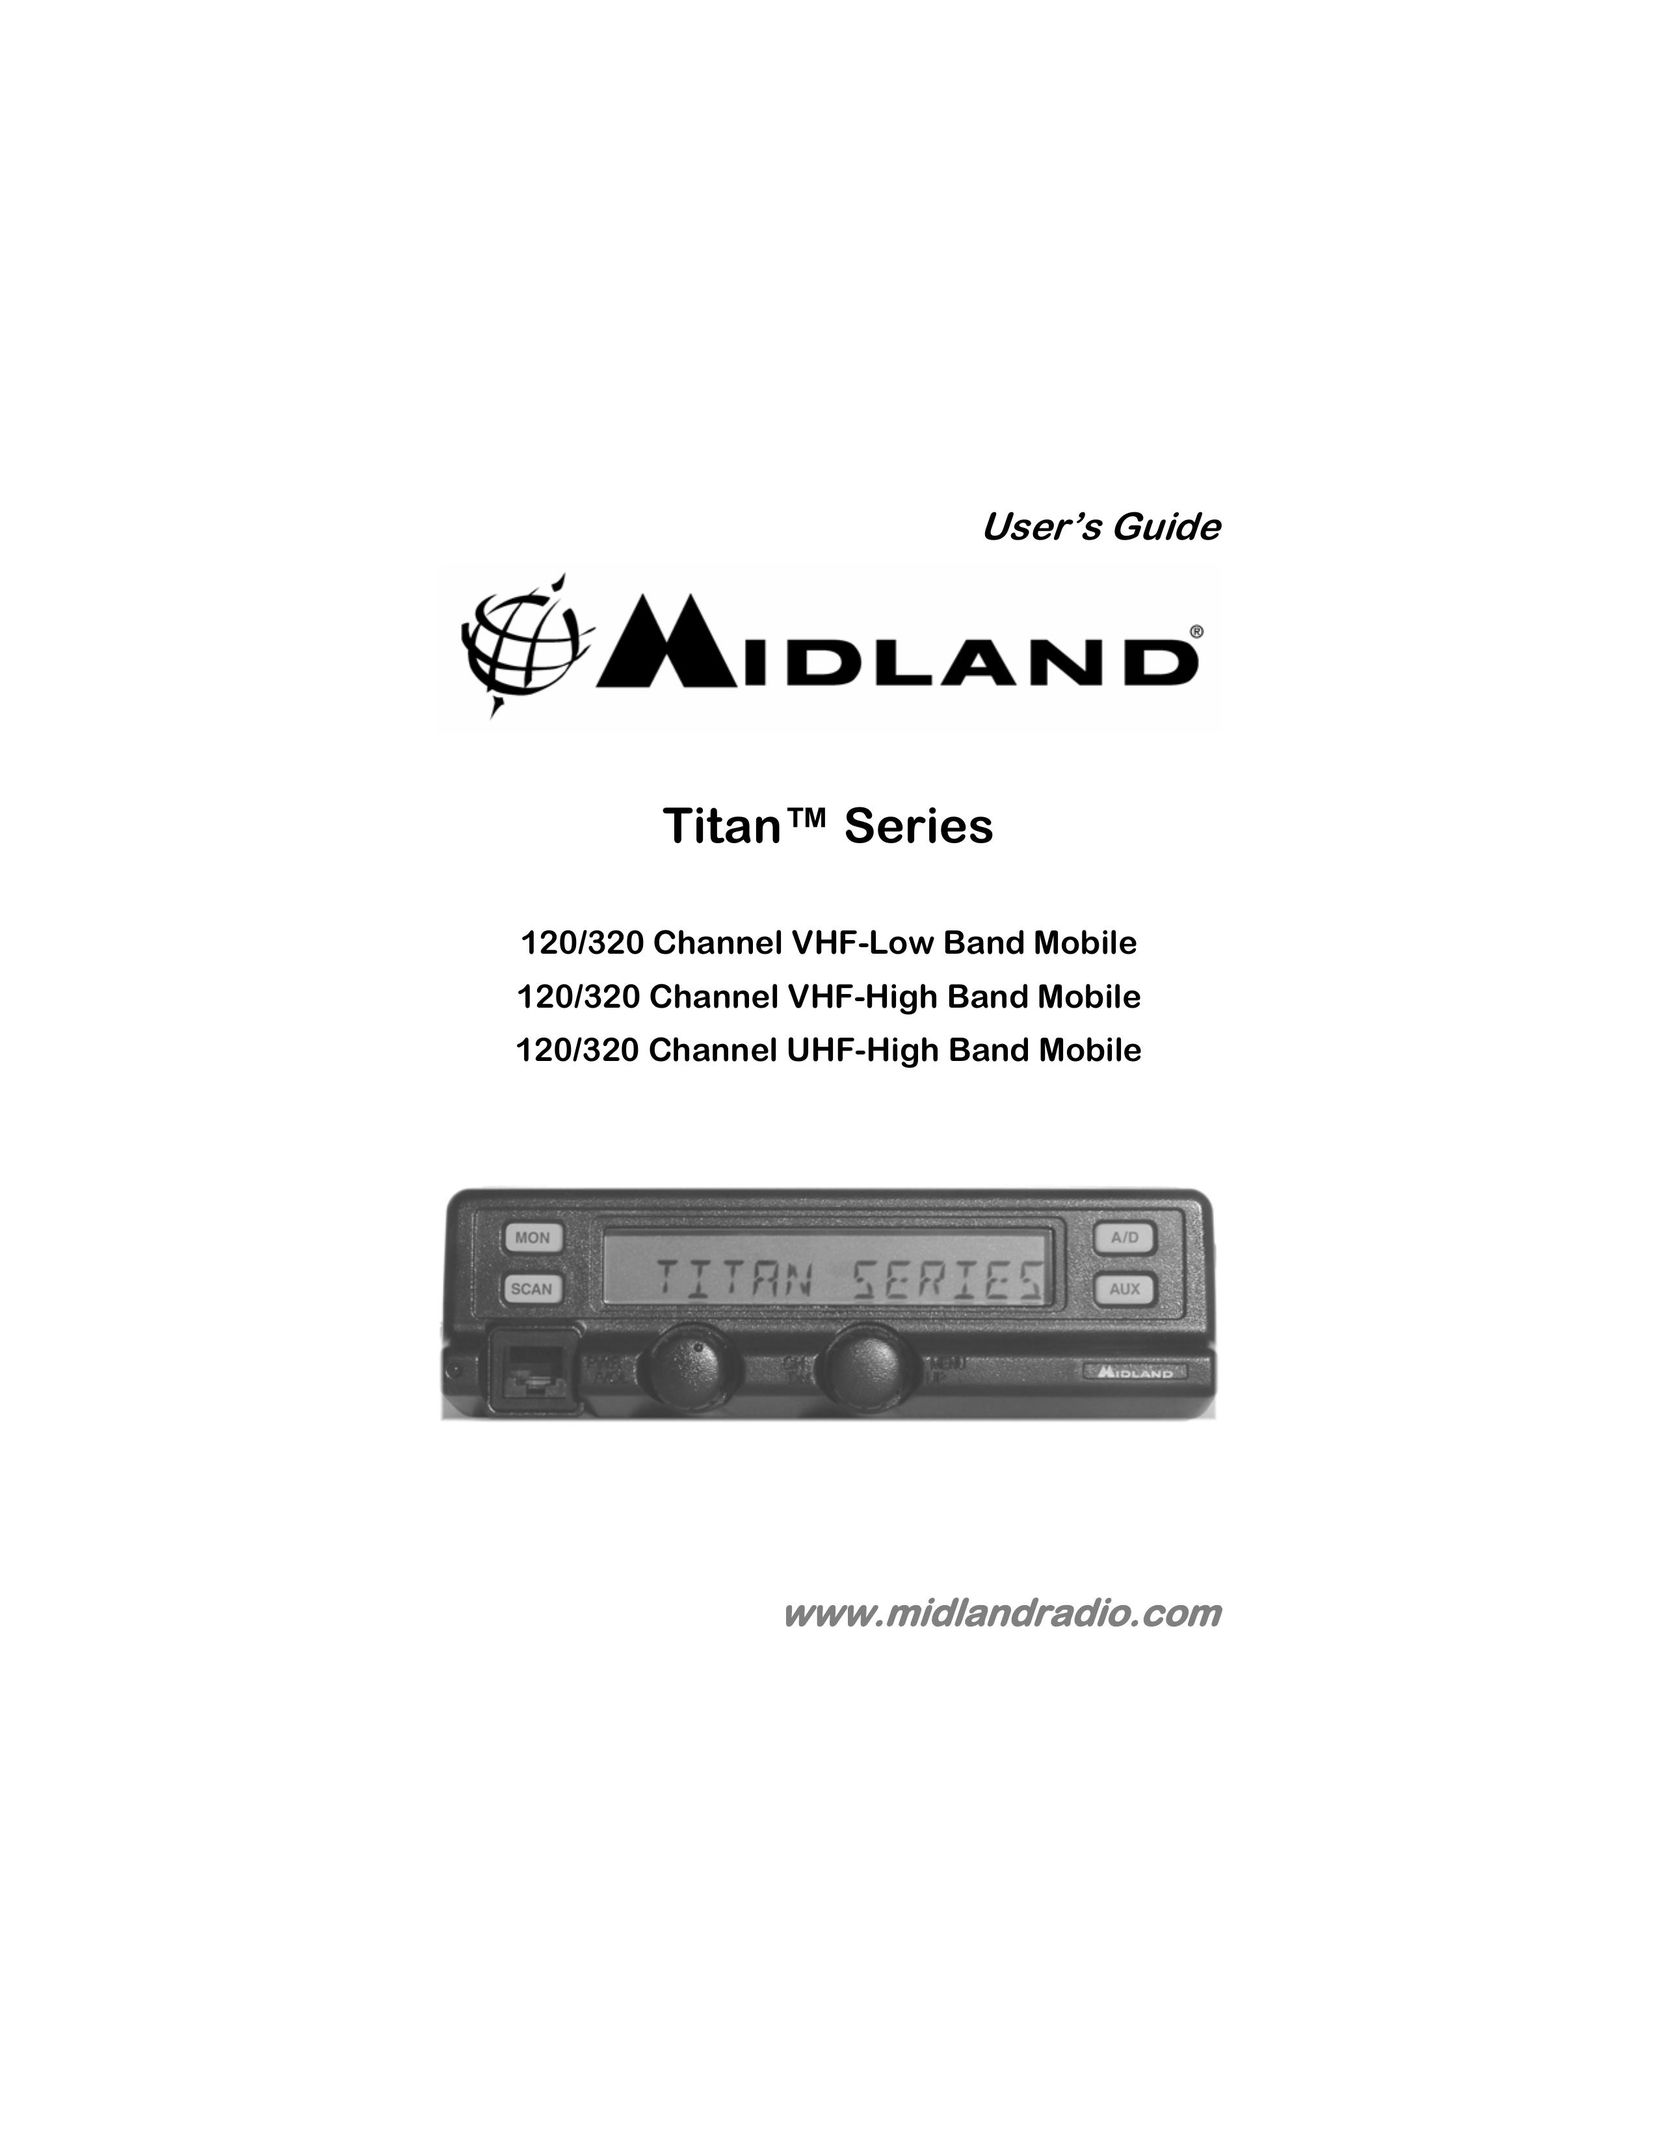 Midland Radio 120/320 CHANNEL UHF-HIGH BAND MOBILE Car Stereo System User Manual